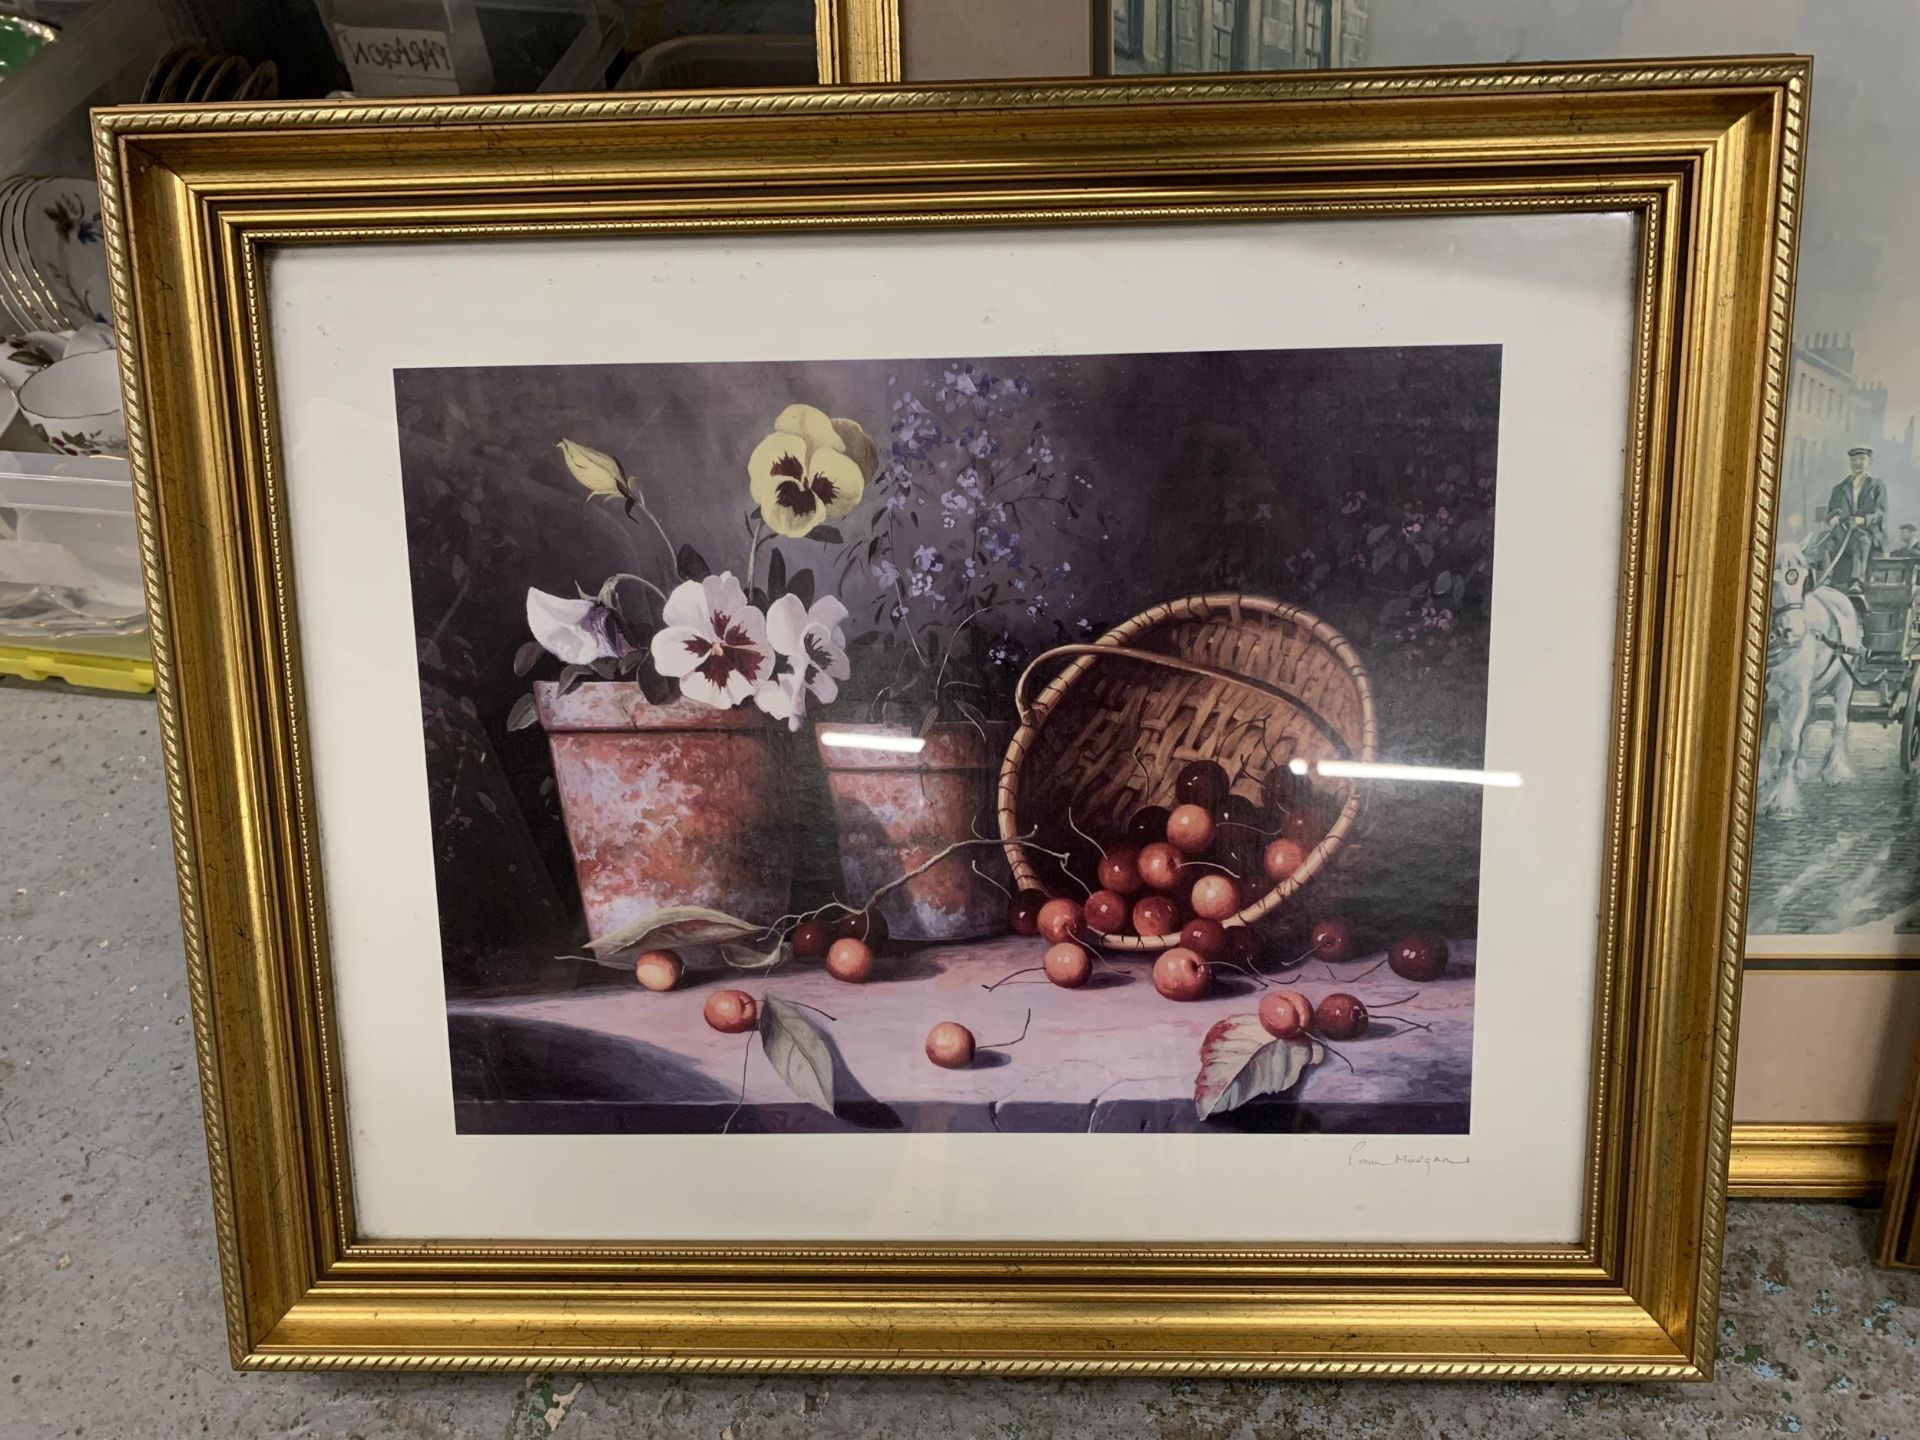 THREE GILT FRAMED PRINTS, TWO STILL LIFE FLOWERS AND FRUITS, THE OTHER A VICTORIAN STREET SCENE - Image 2 of 6